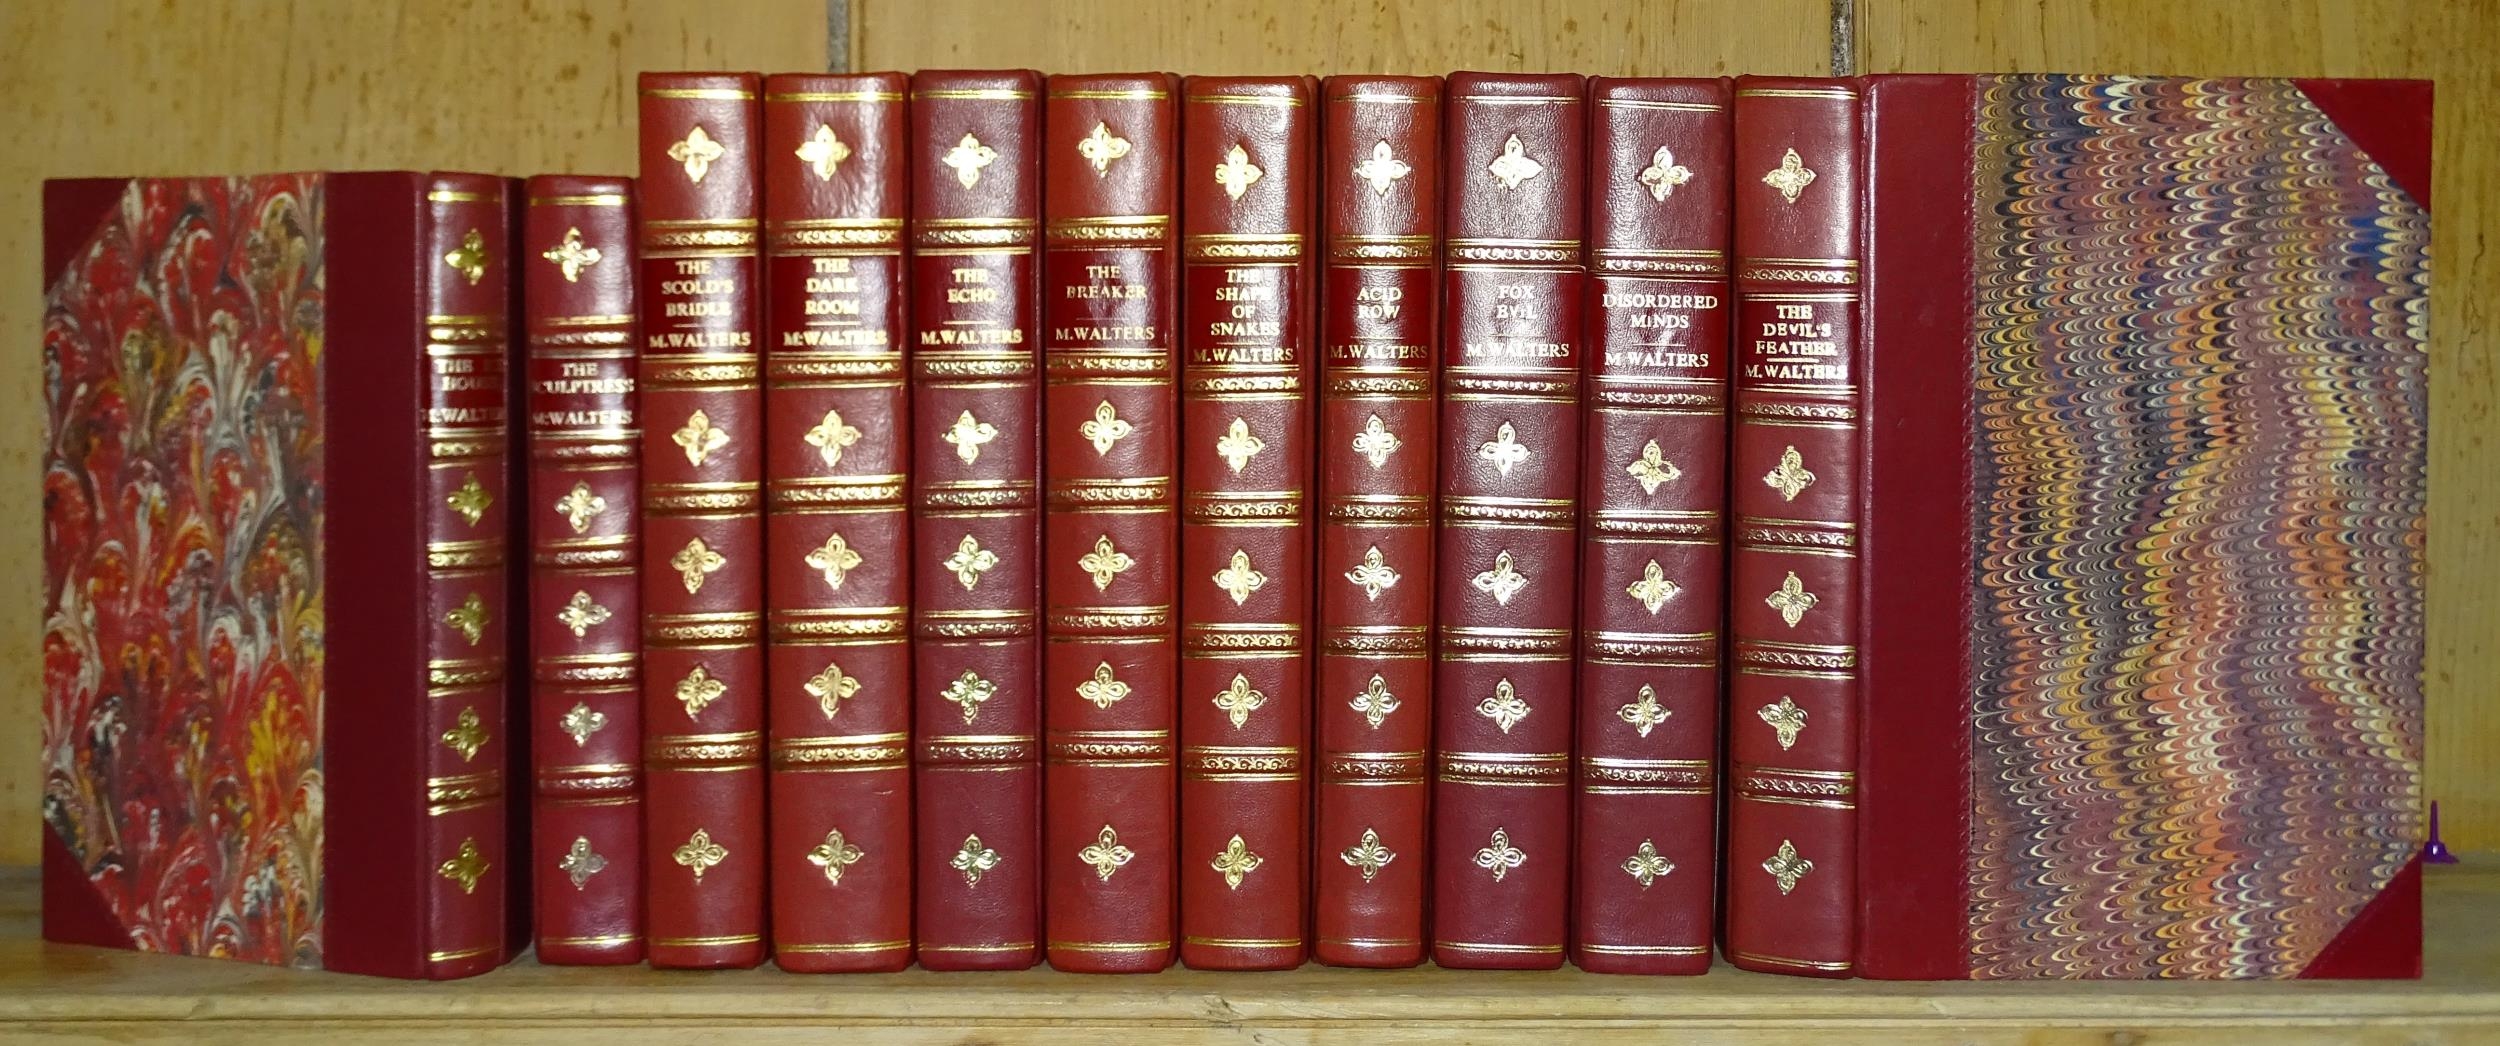 Walters (Minette), eleven novels, all but one 1st edns, eight signed, all rebound red mor gt, with - Image 2 of 2